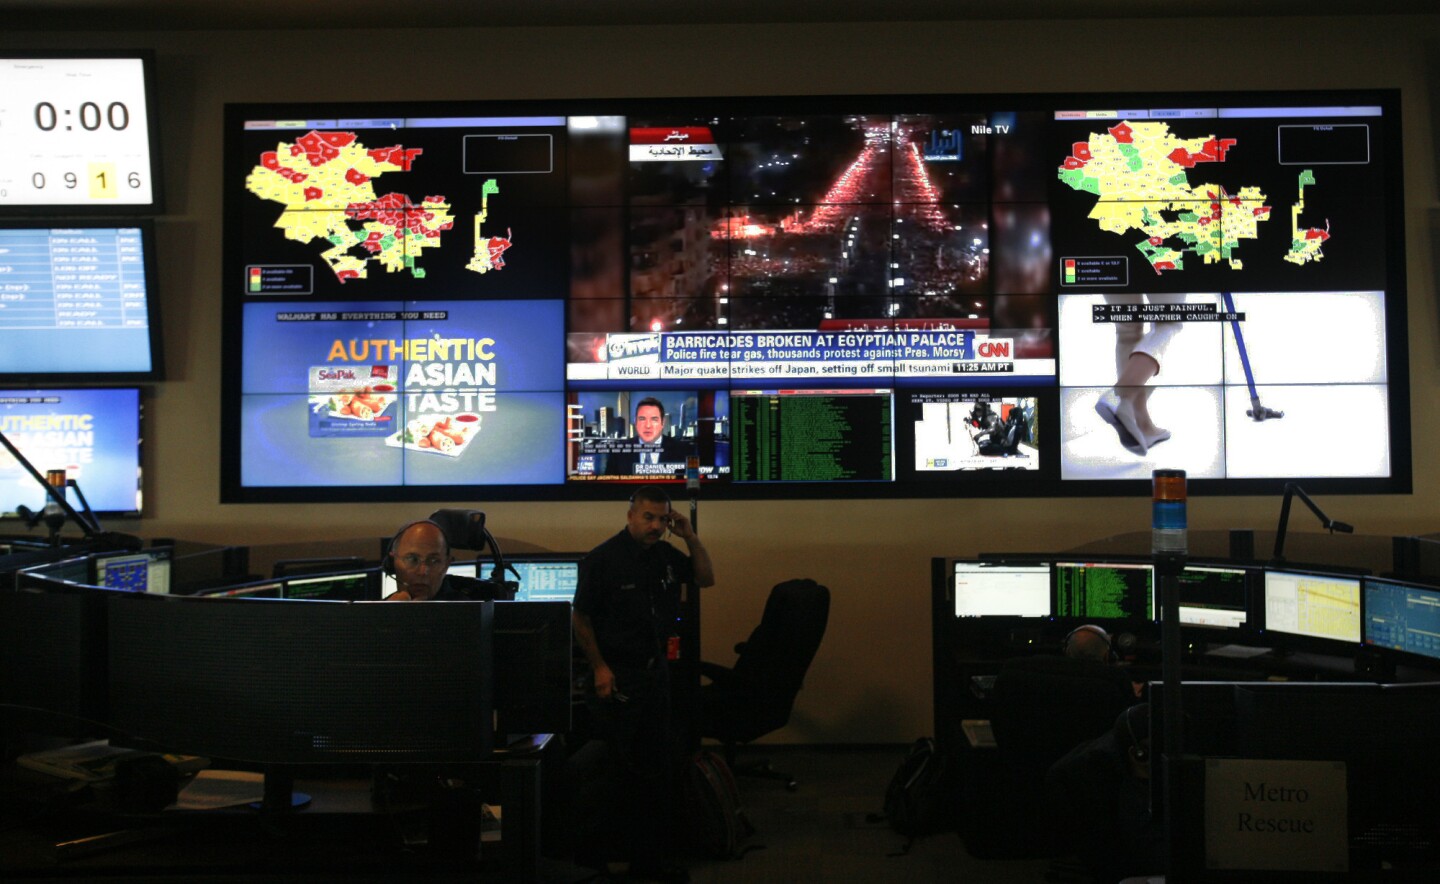 The Los Angeles Fire Department dispatch center with electronic maps of the city as well as television station broadcasts on the wall behind the dispatchers on December 07, 2012. In the event of a major occurrence, the dispatchers can watch TV helicopter coverage to help broaden their understanding of the situation.